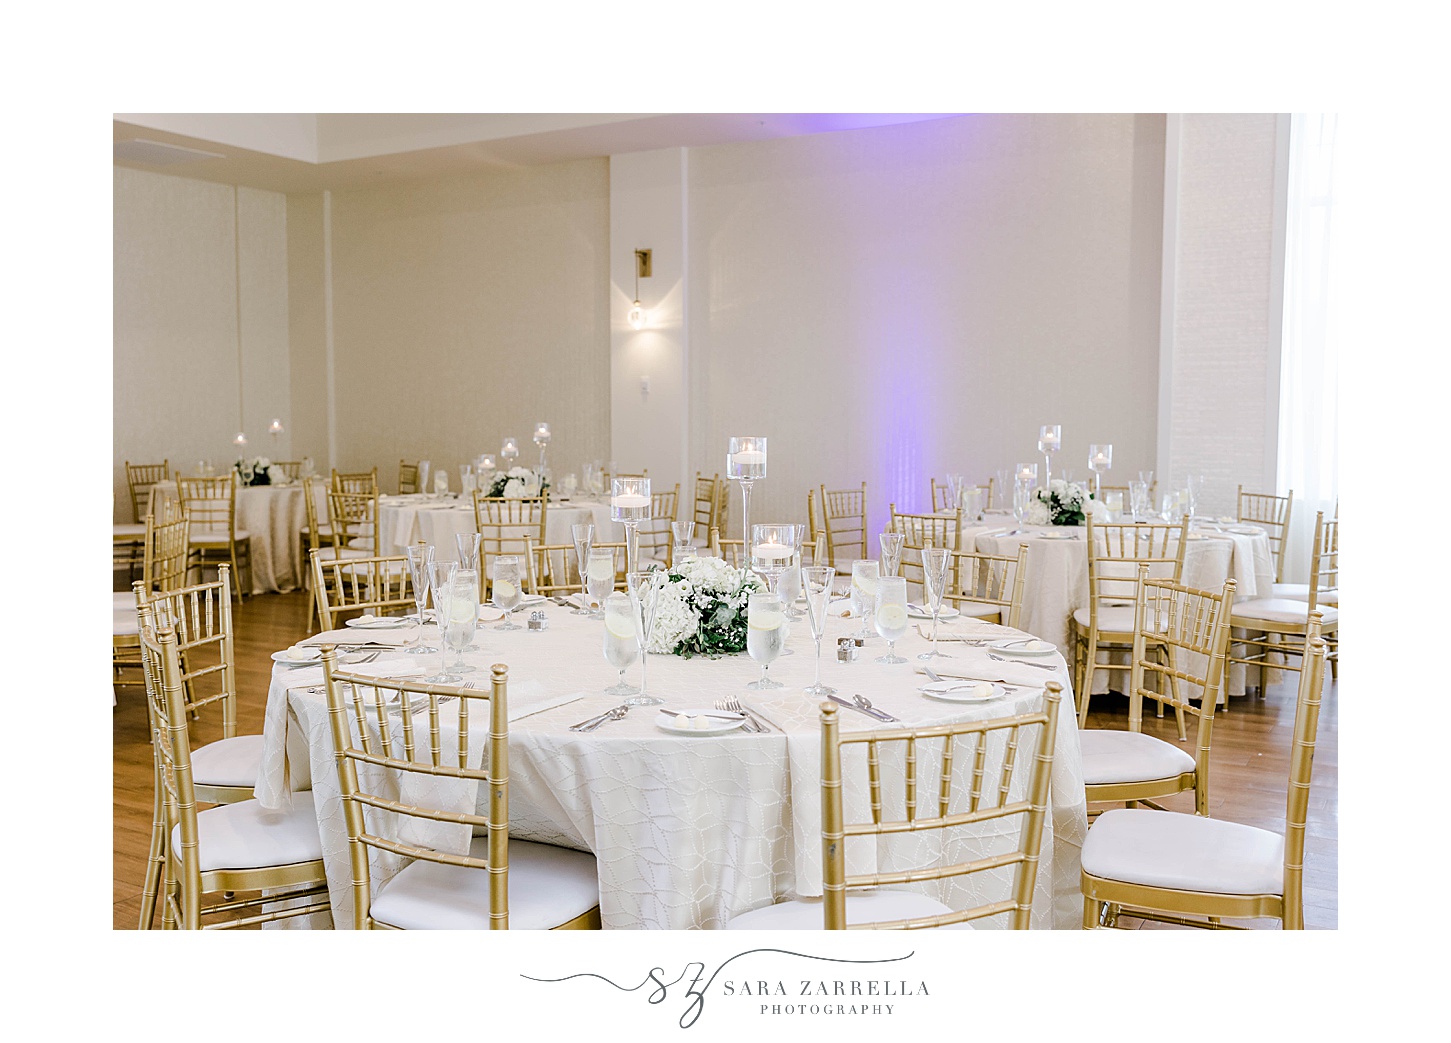 wedding reception tables with white cloth and gold chivari chairs t the Wyndham Newport Hotel